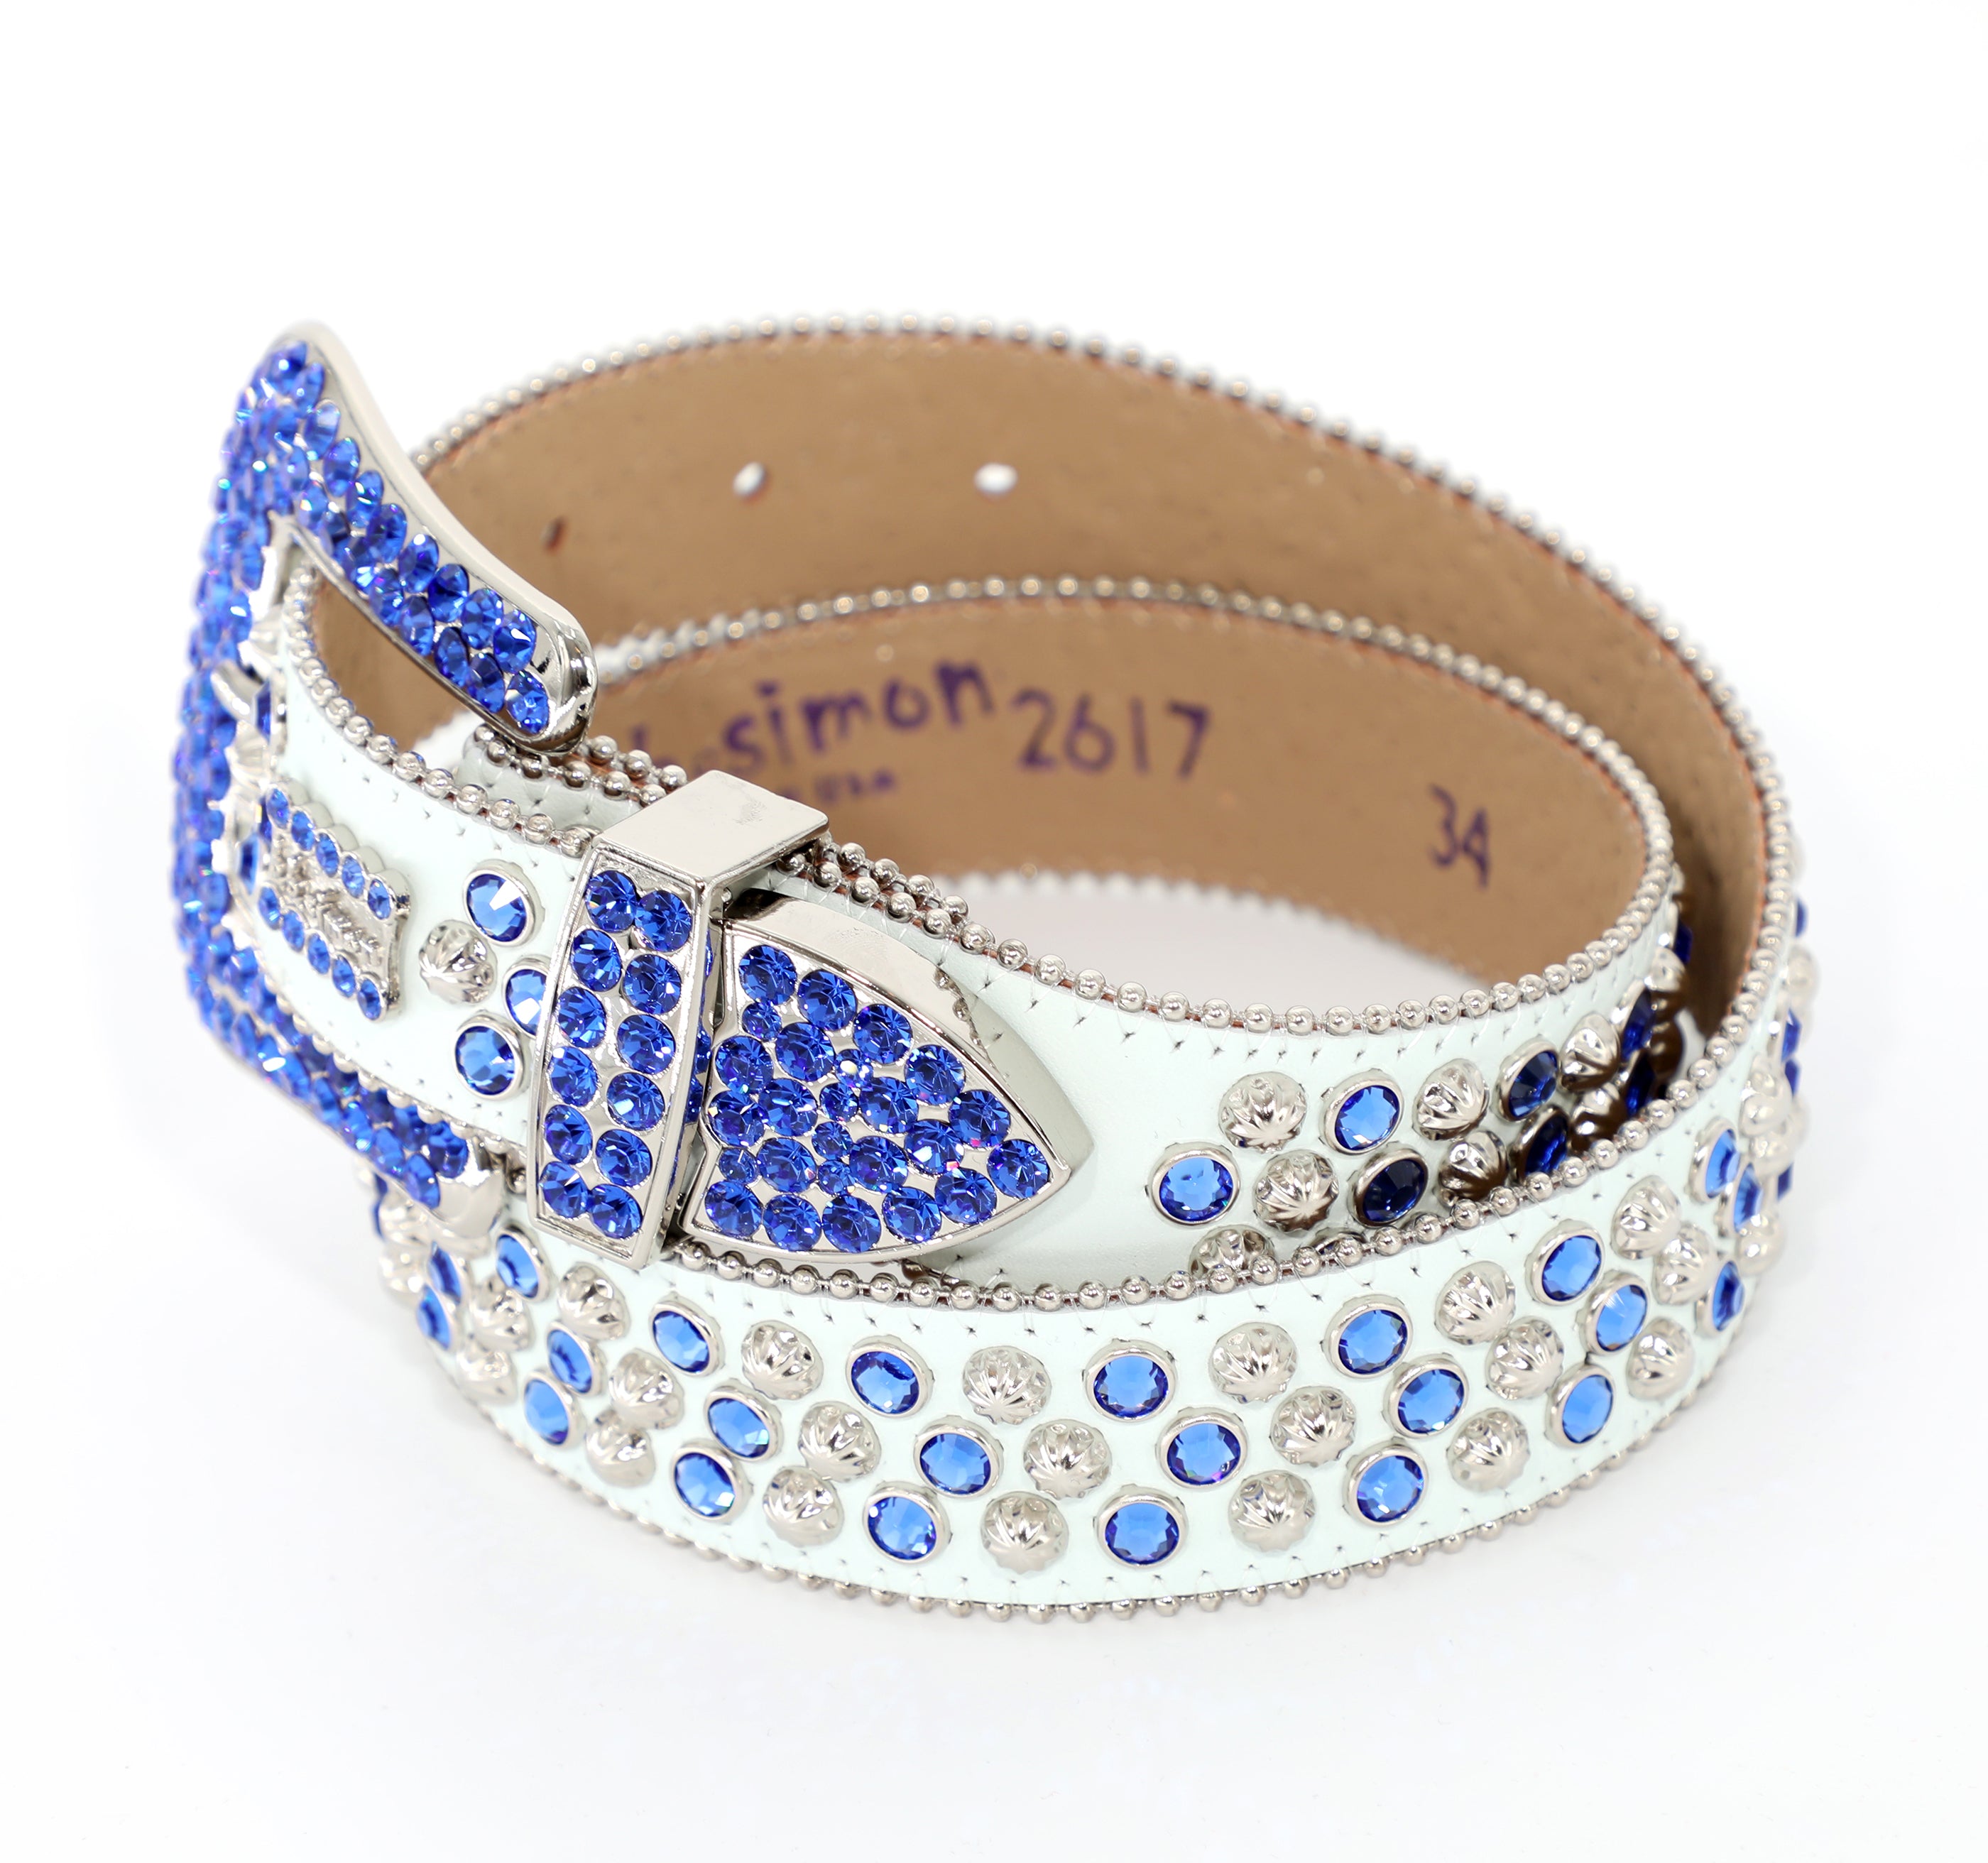 B.B. SIMON WHITE BELT W/ BLUE CRYSTALS AND SILVER PARACHUTE STUDS